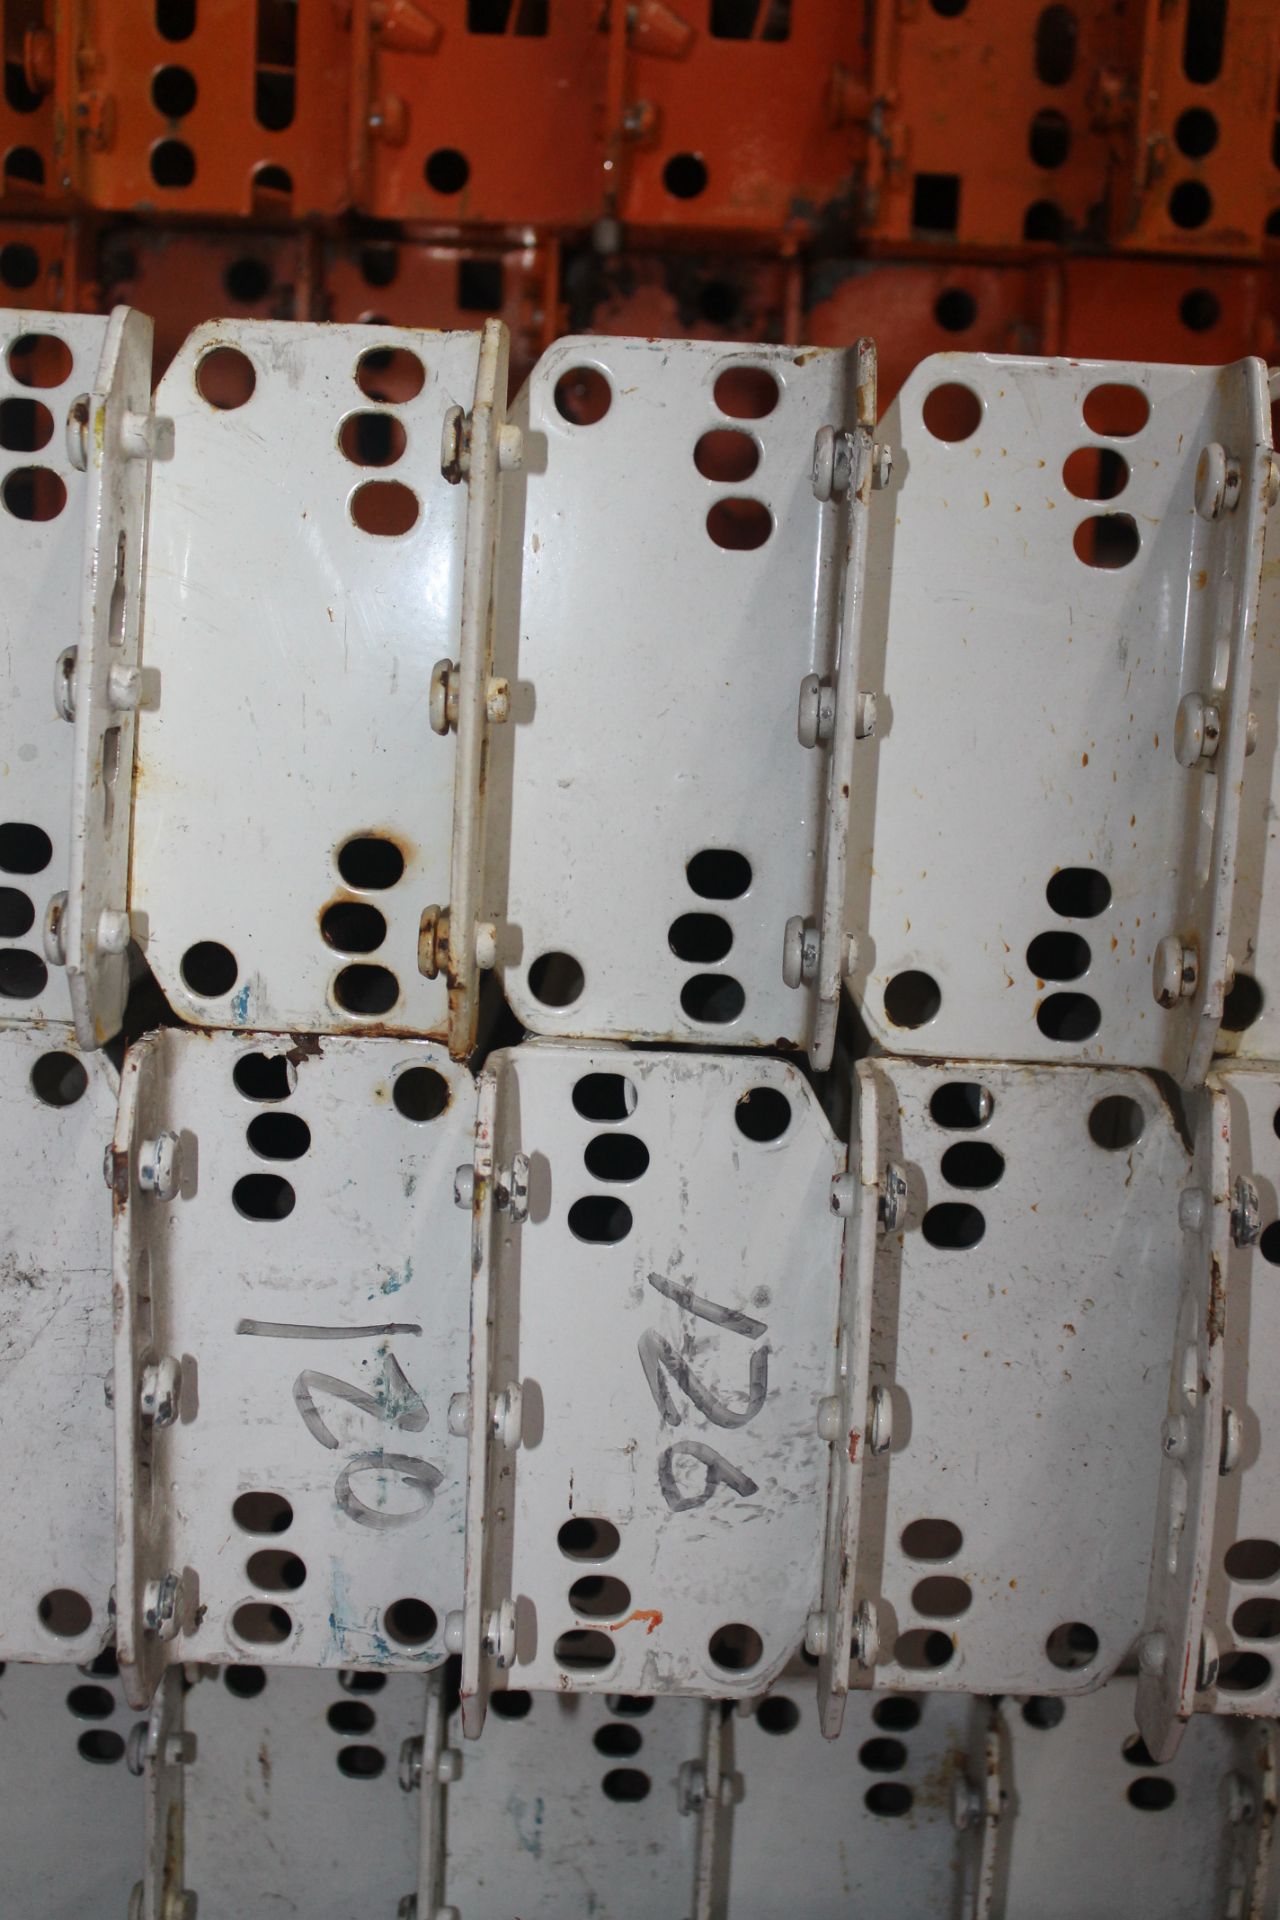 8 SECTIONS OF 192"H X 36"D X 99"L TEARDROP STYLE PALLET RACKS, - Image 3 of 3